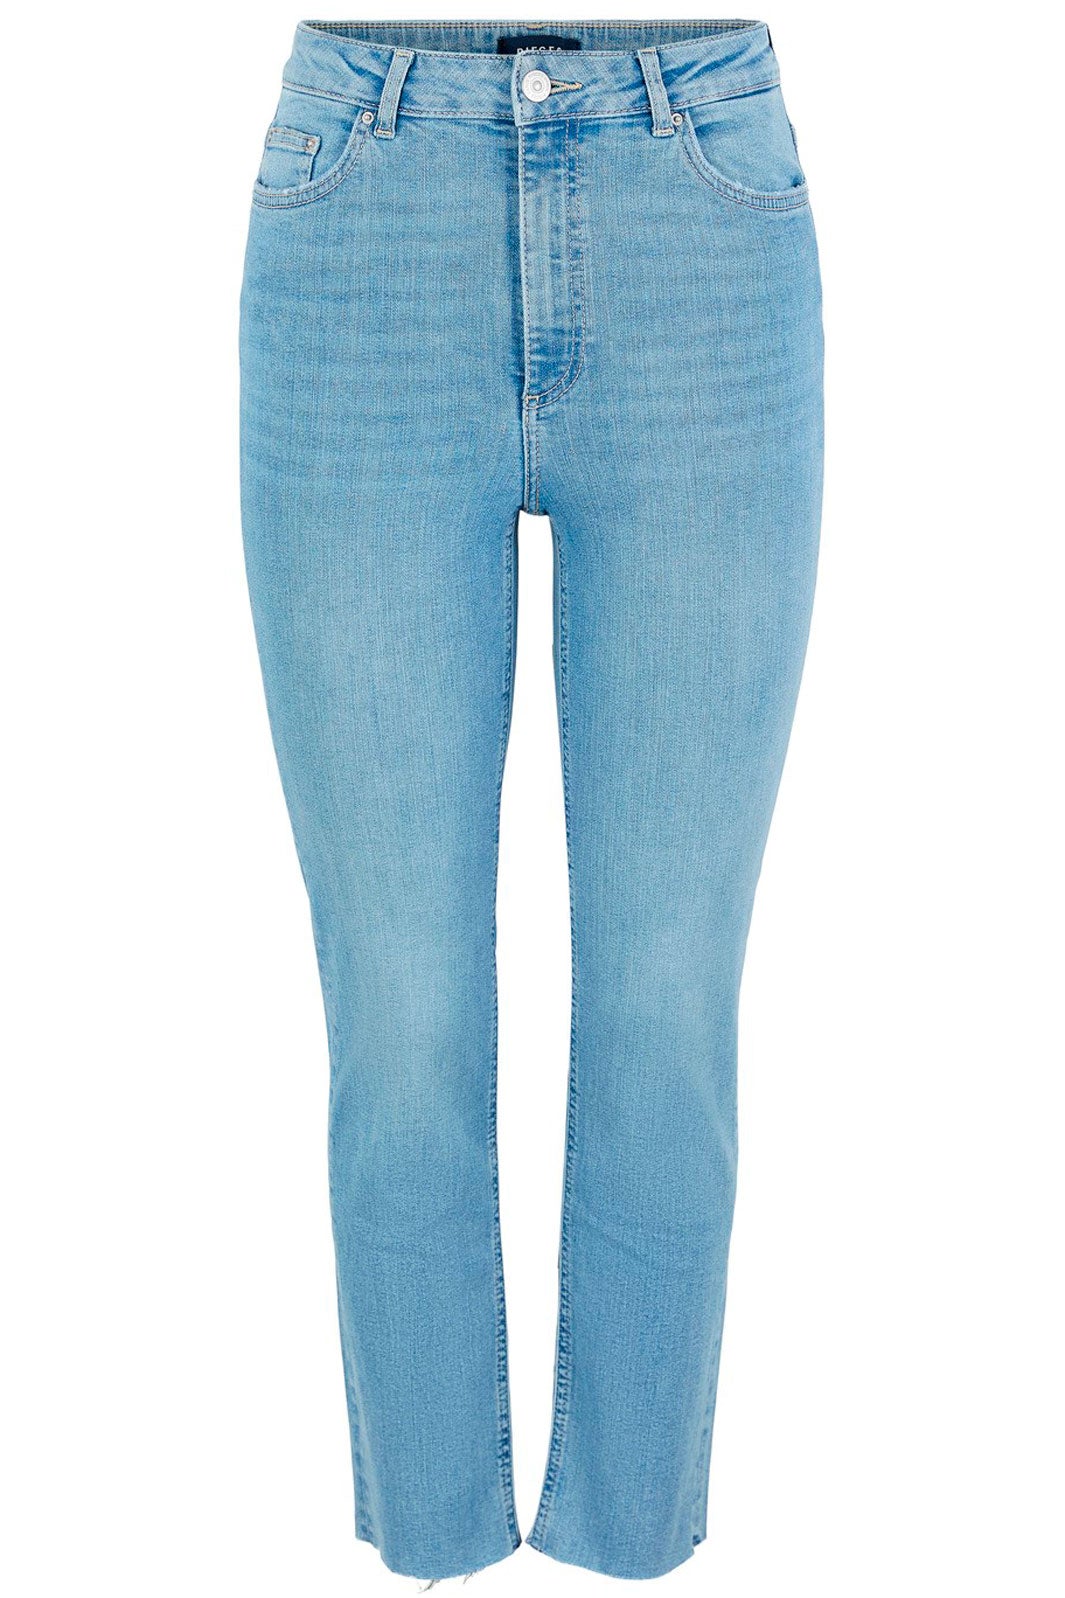 PIECES - PcDelly Straight Hw - Light Blue Denim Jeans 